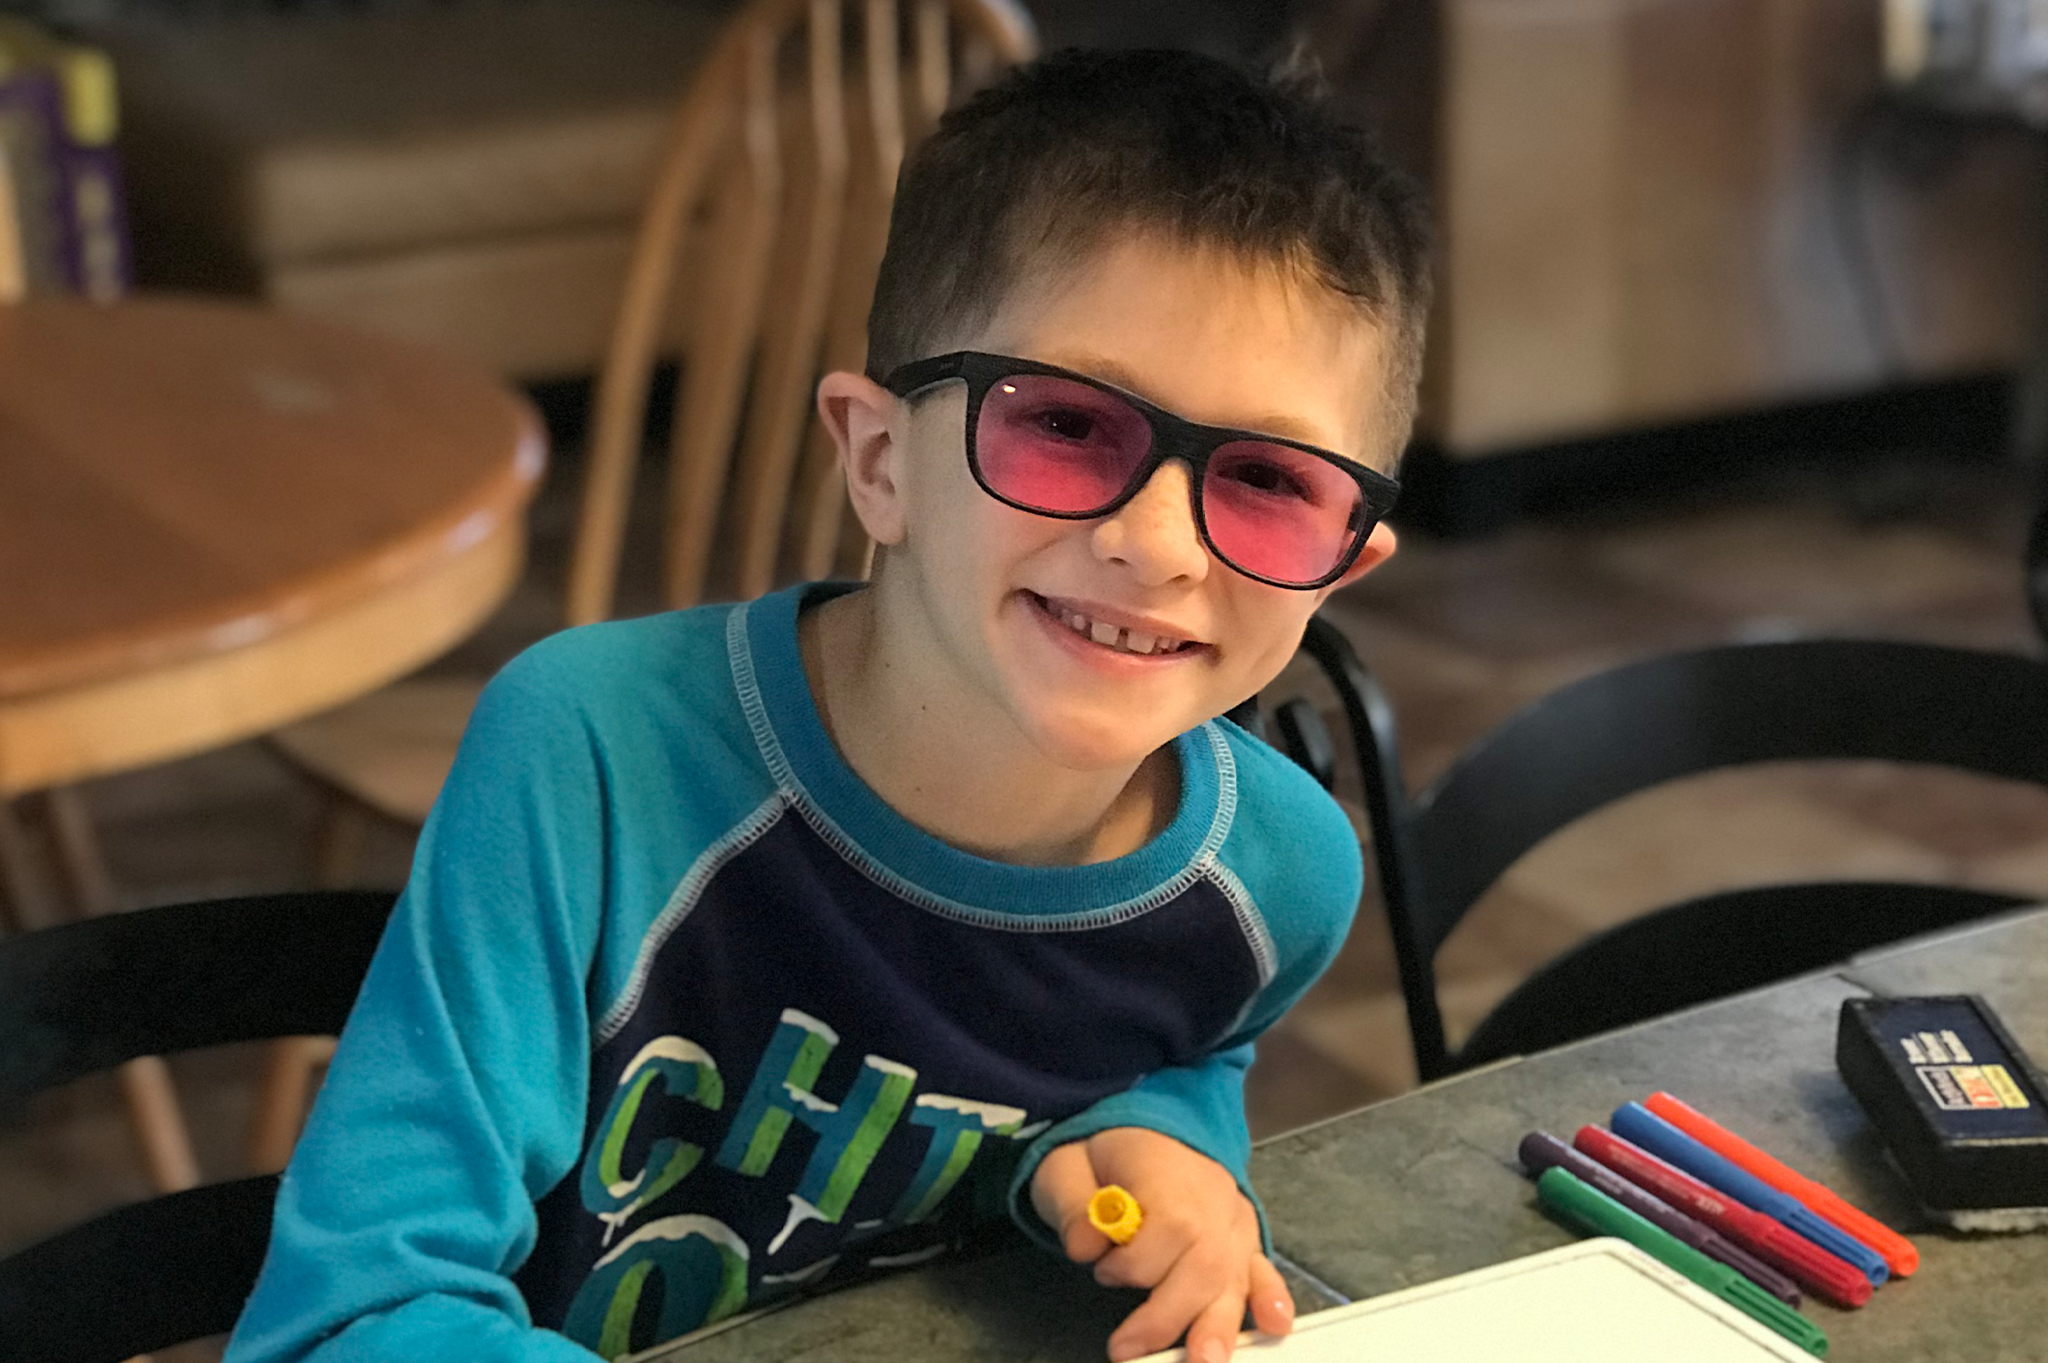 What Age Should I Give My Child EnChroma Glasses for Color Blindness?